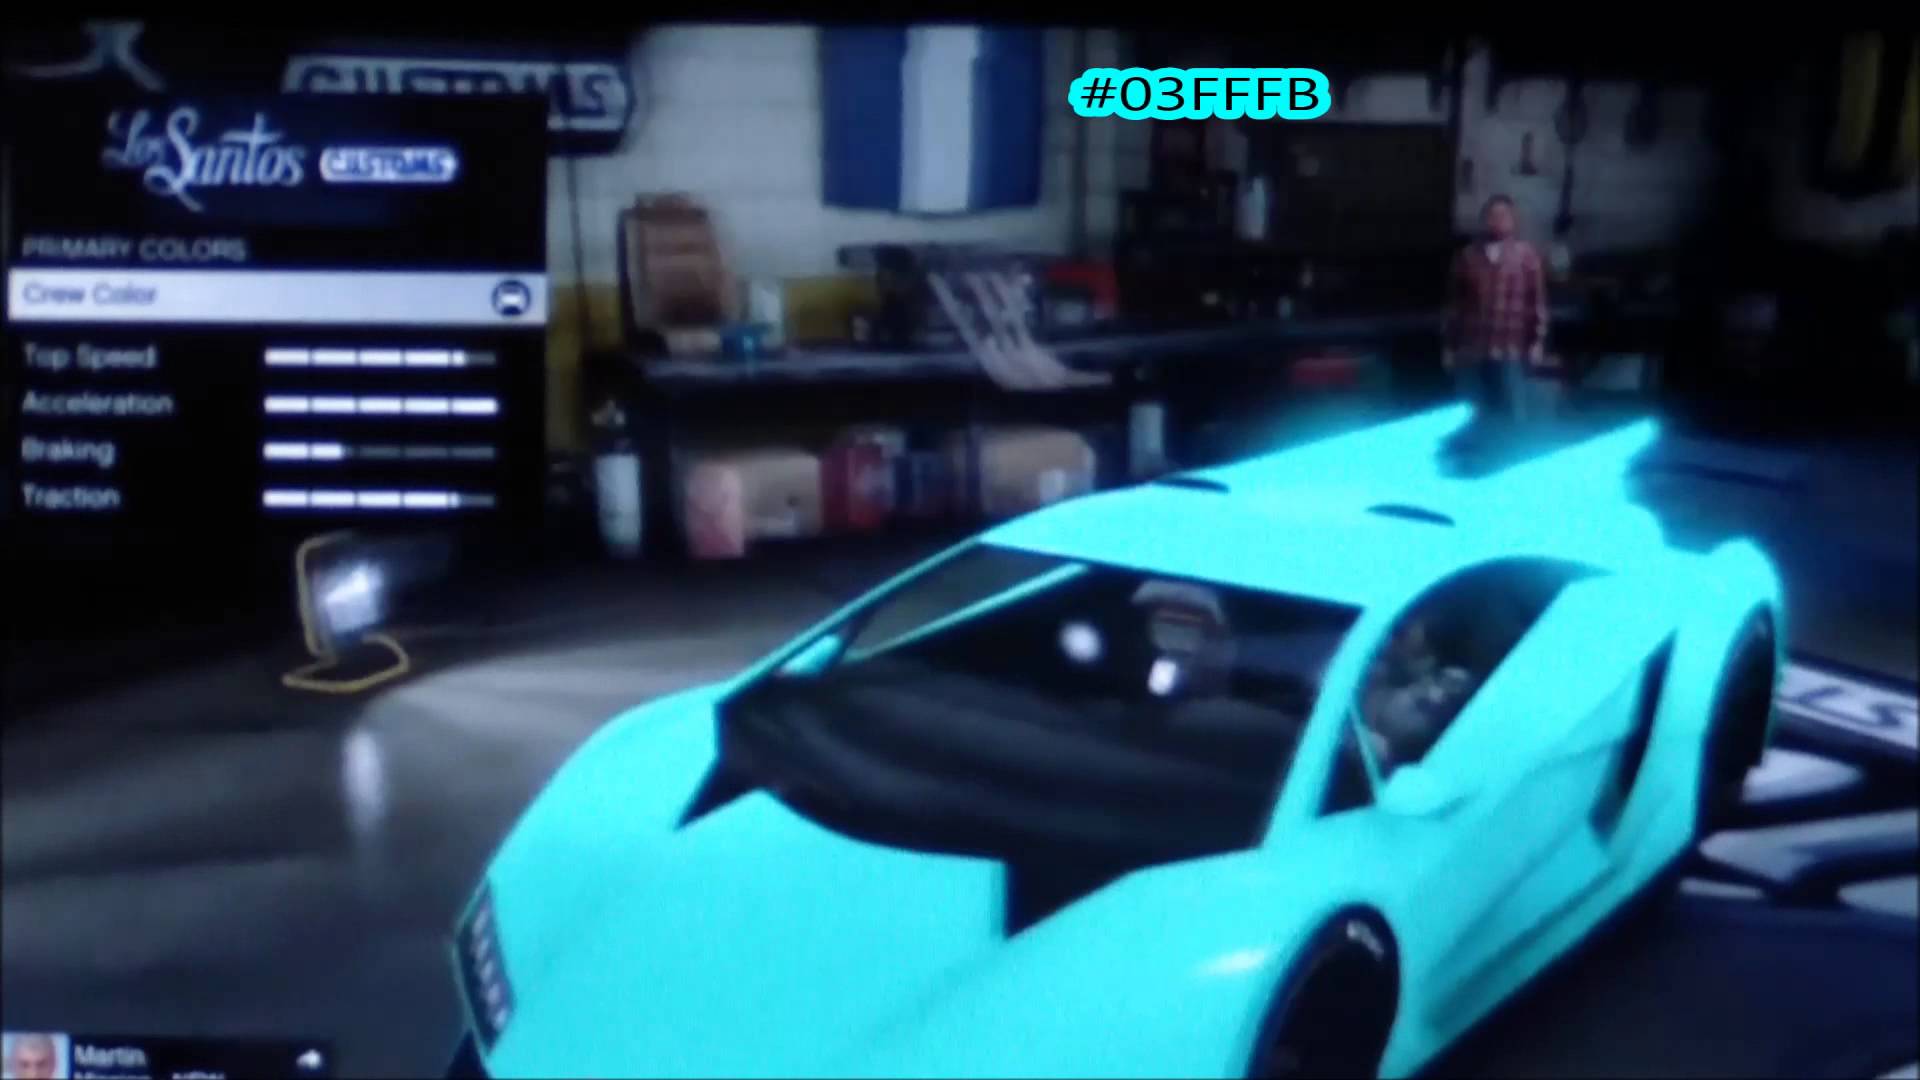 HOW TO GET FLUORESCENT BLUE CREW COLOR ON GTA 5 - YouTube